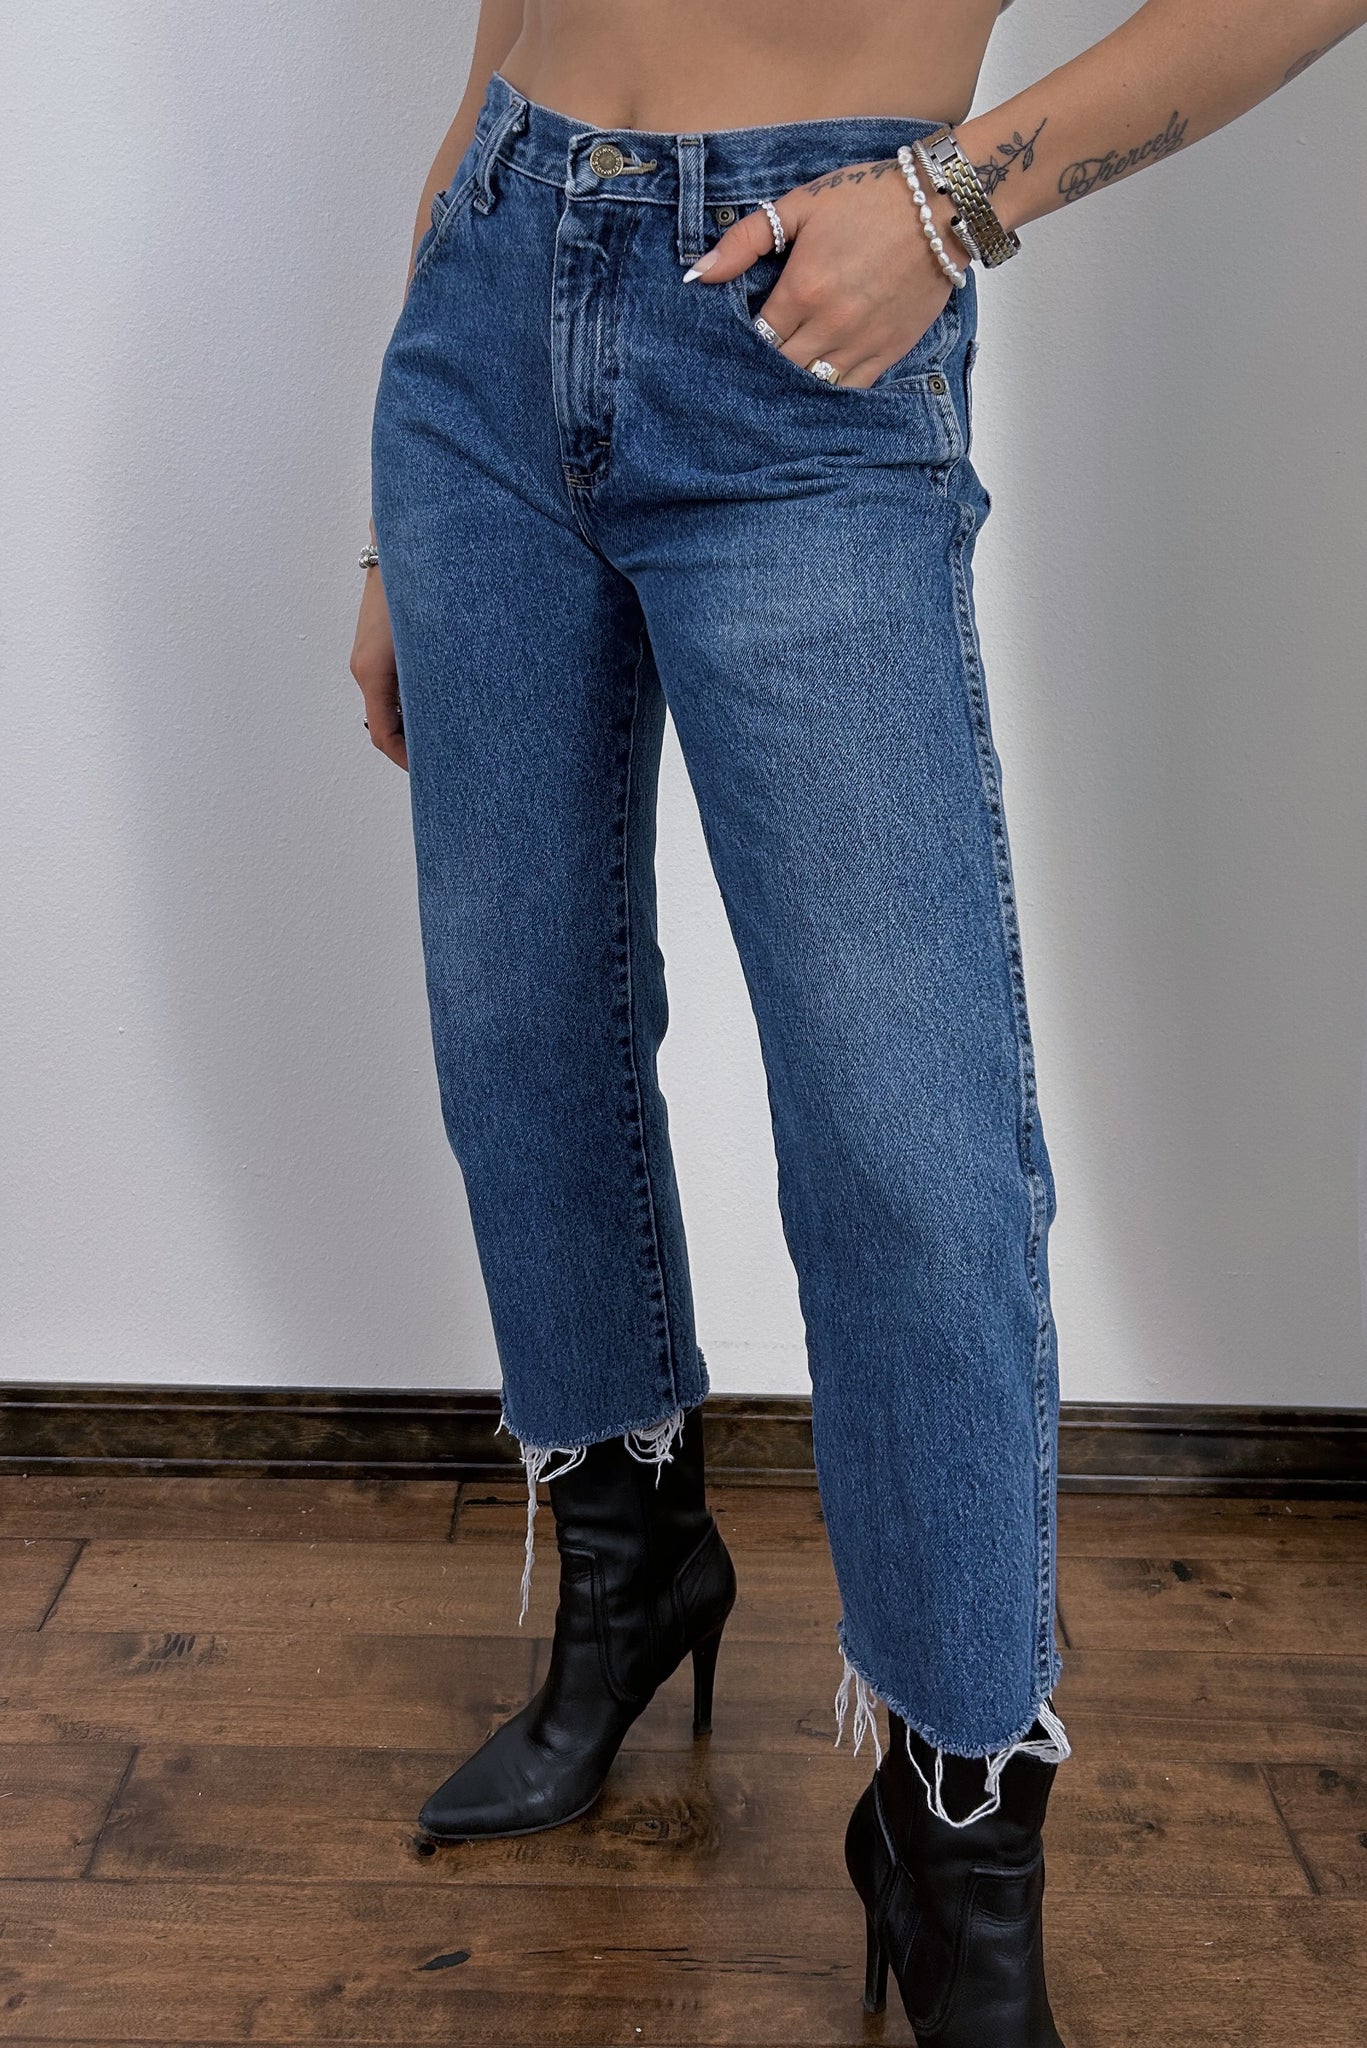 ReShaped Jeans #13